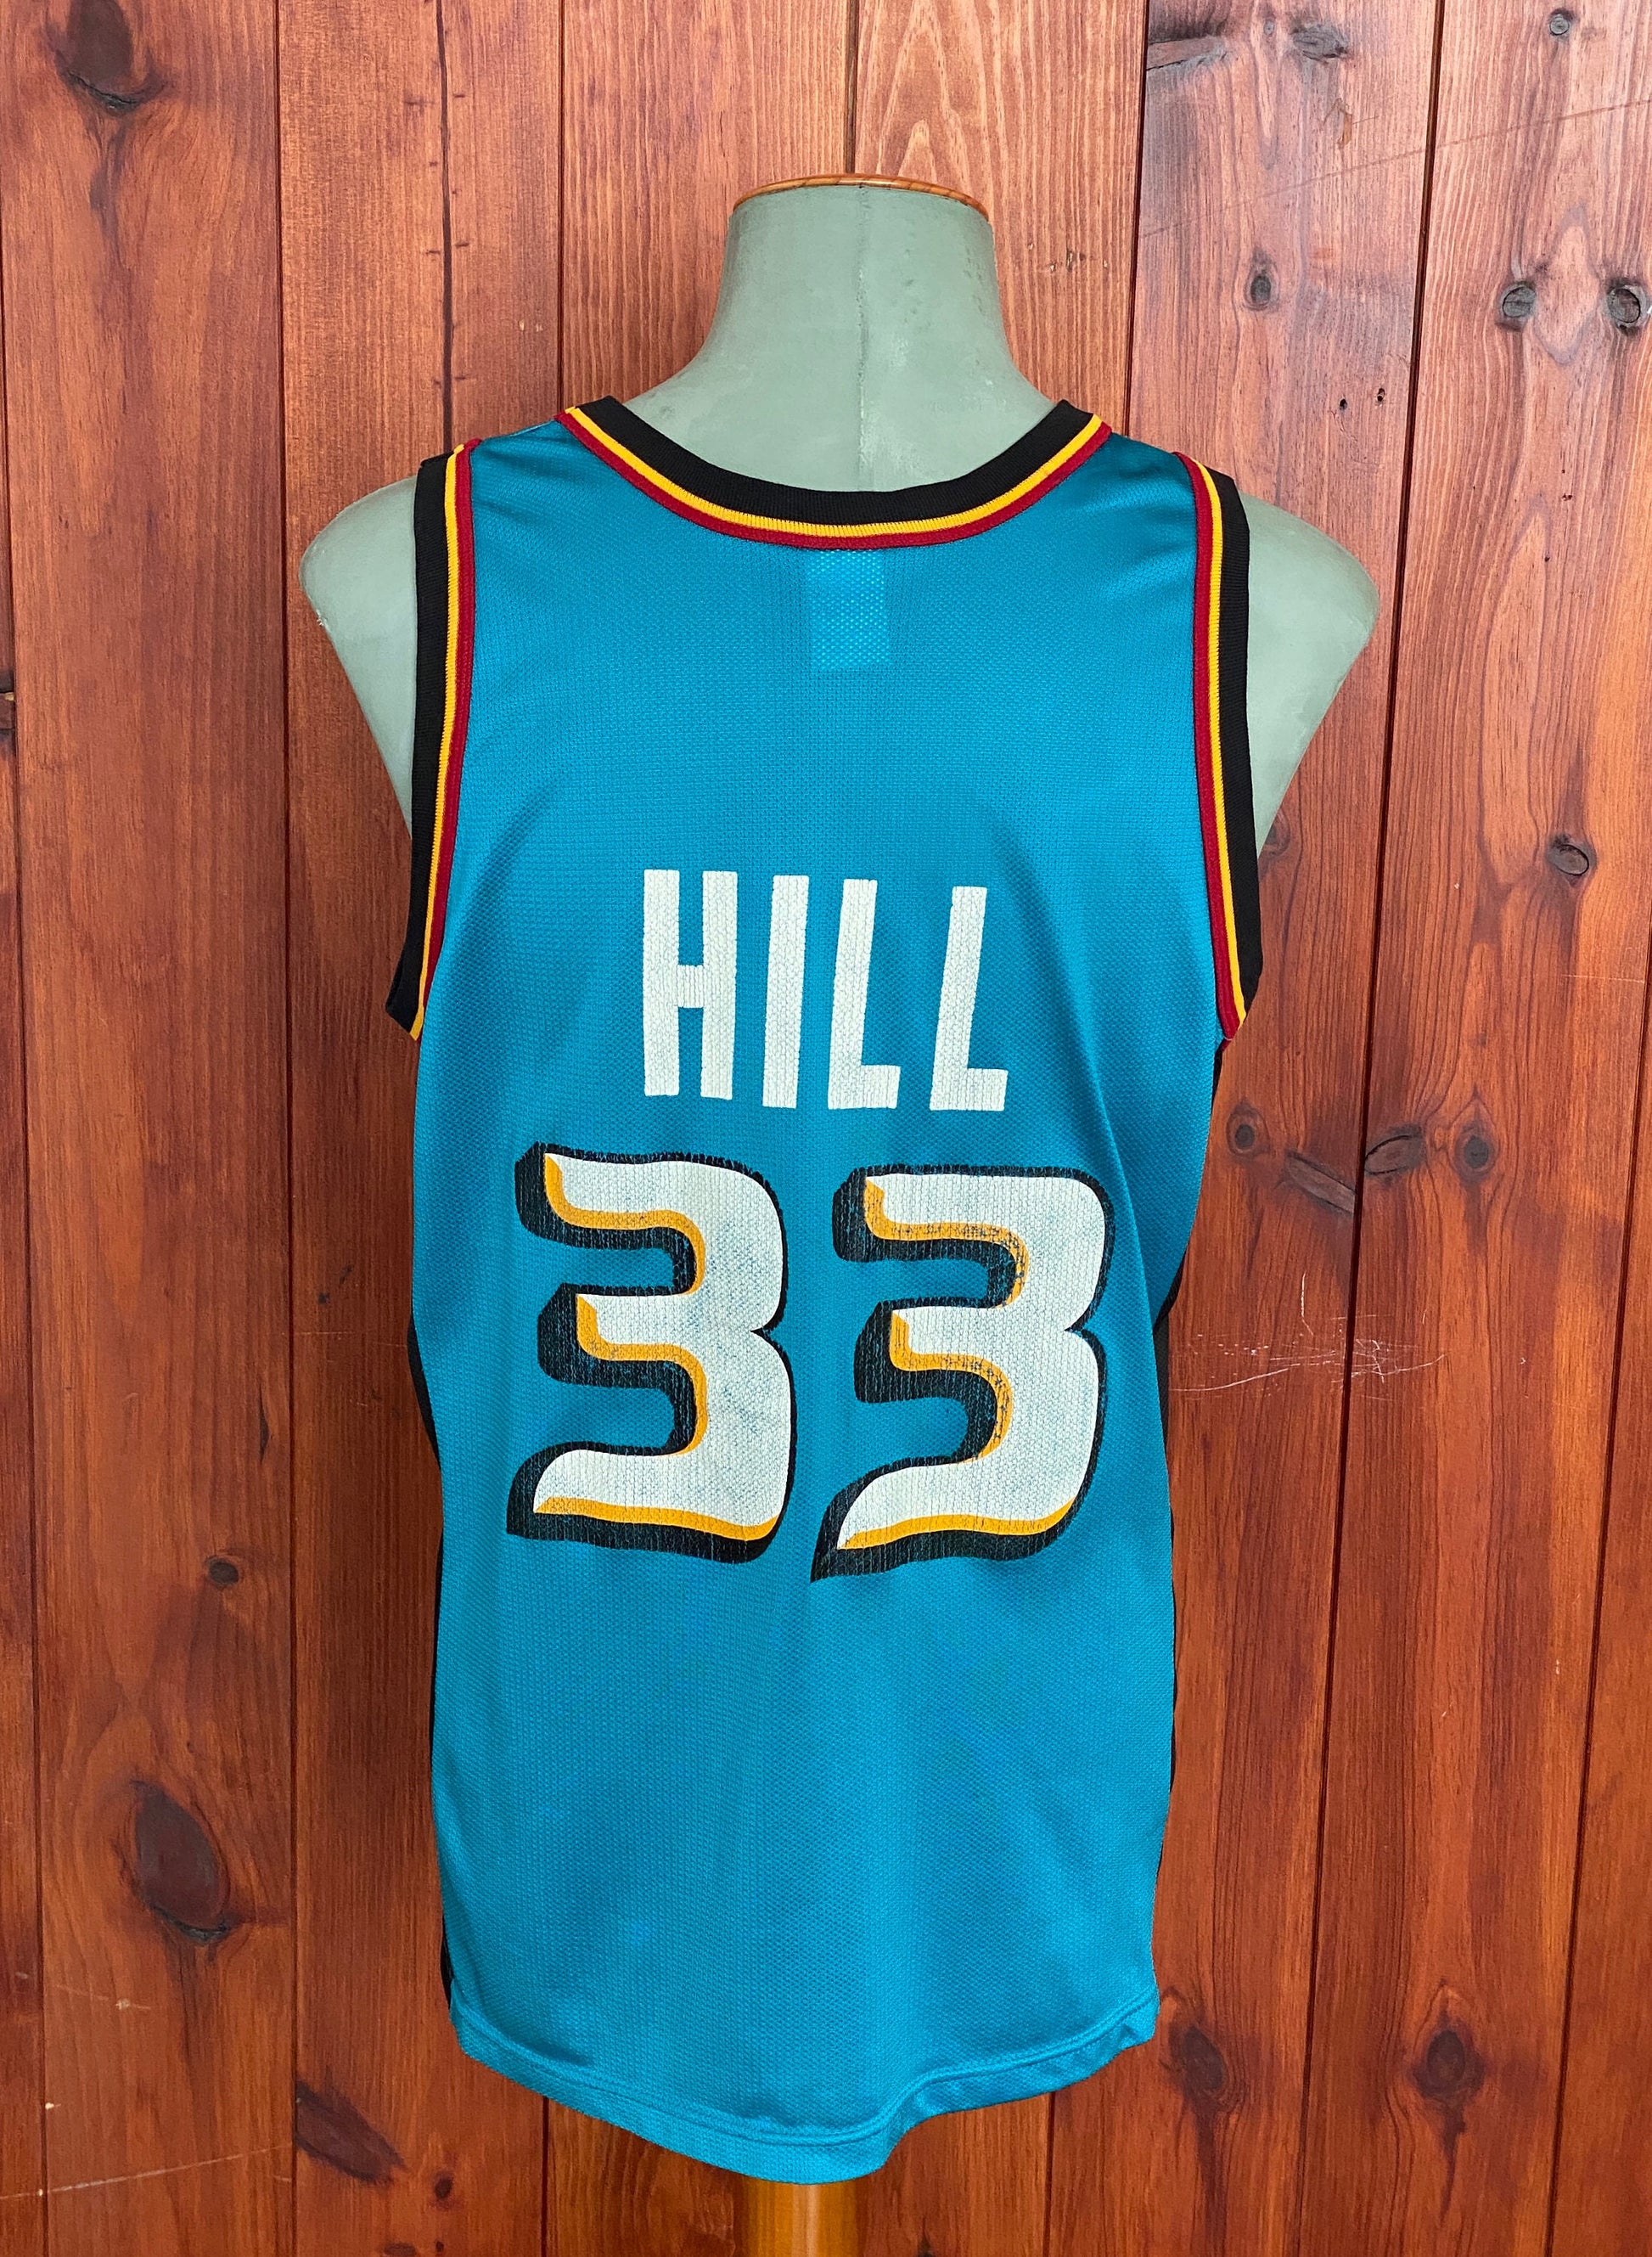 Vintage 90s NBA Champion Detroit Pistons Hill #33 jersey, size 44 - back view. Made in USA by Champion.